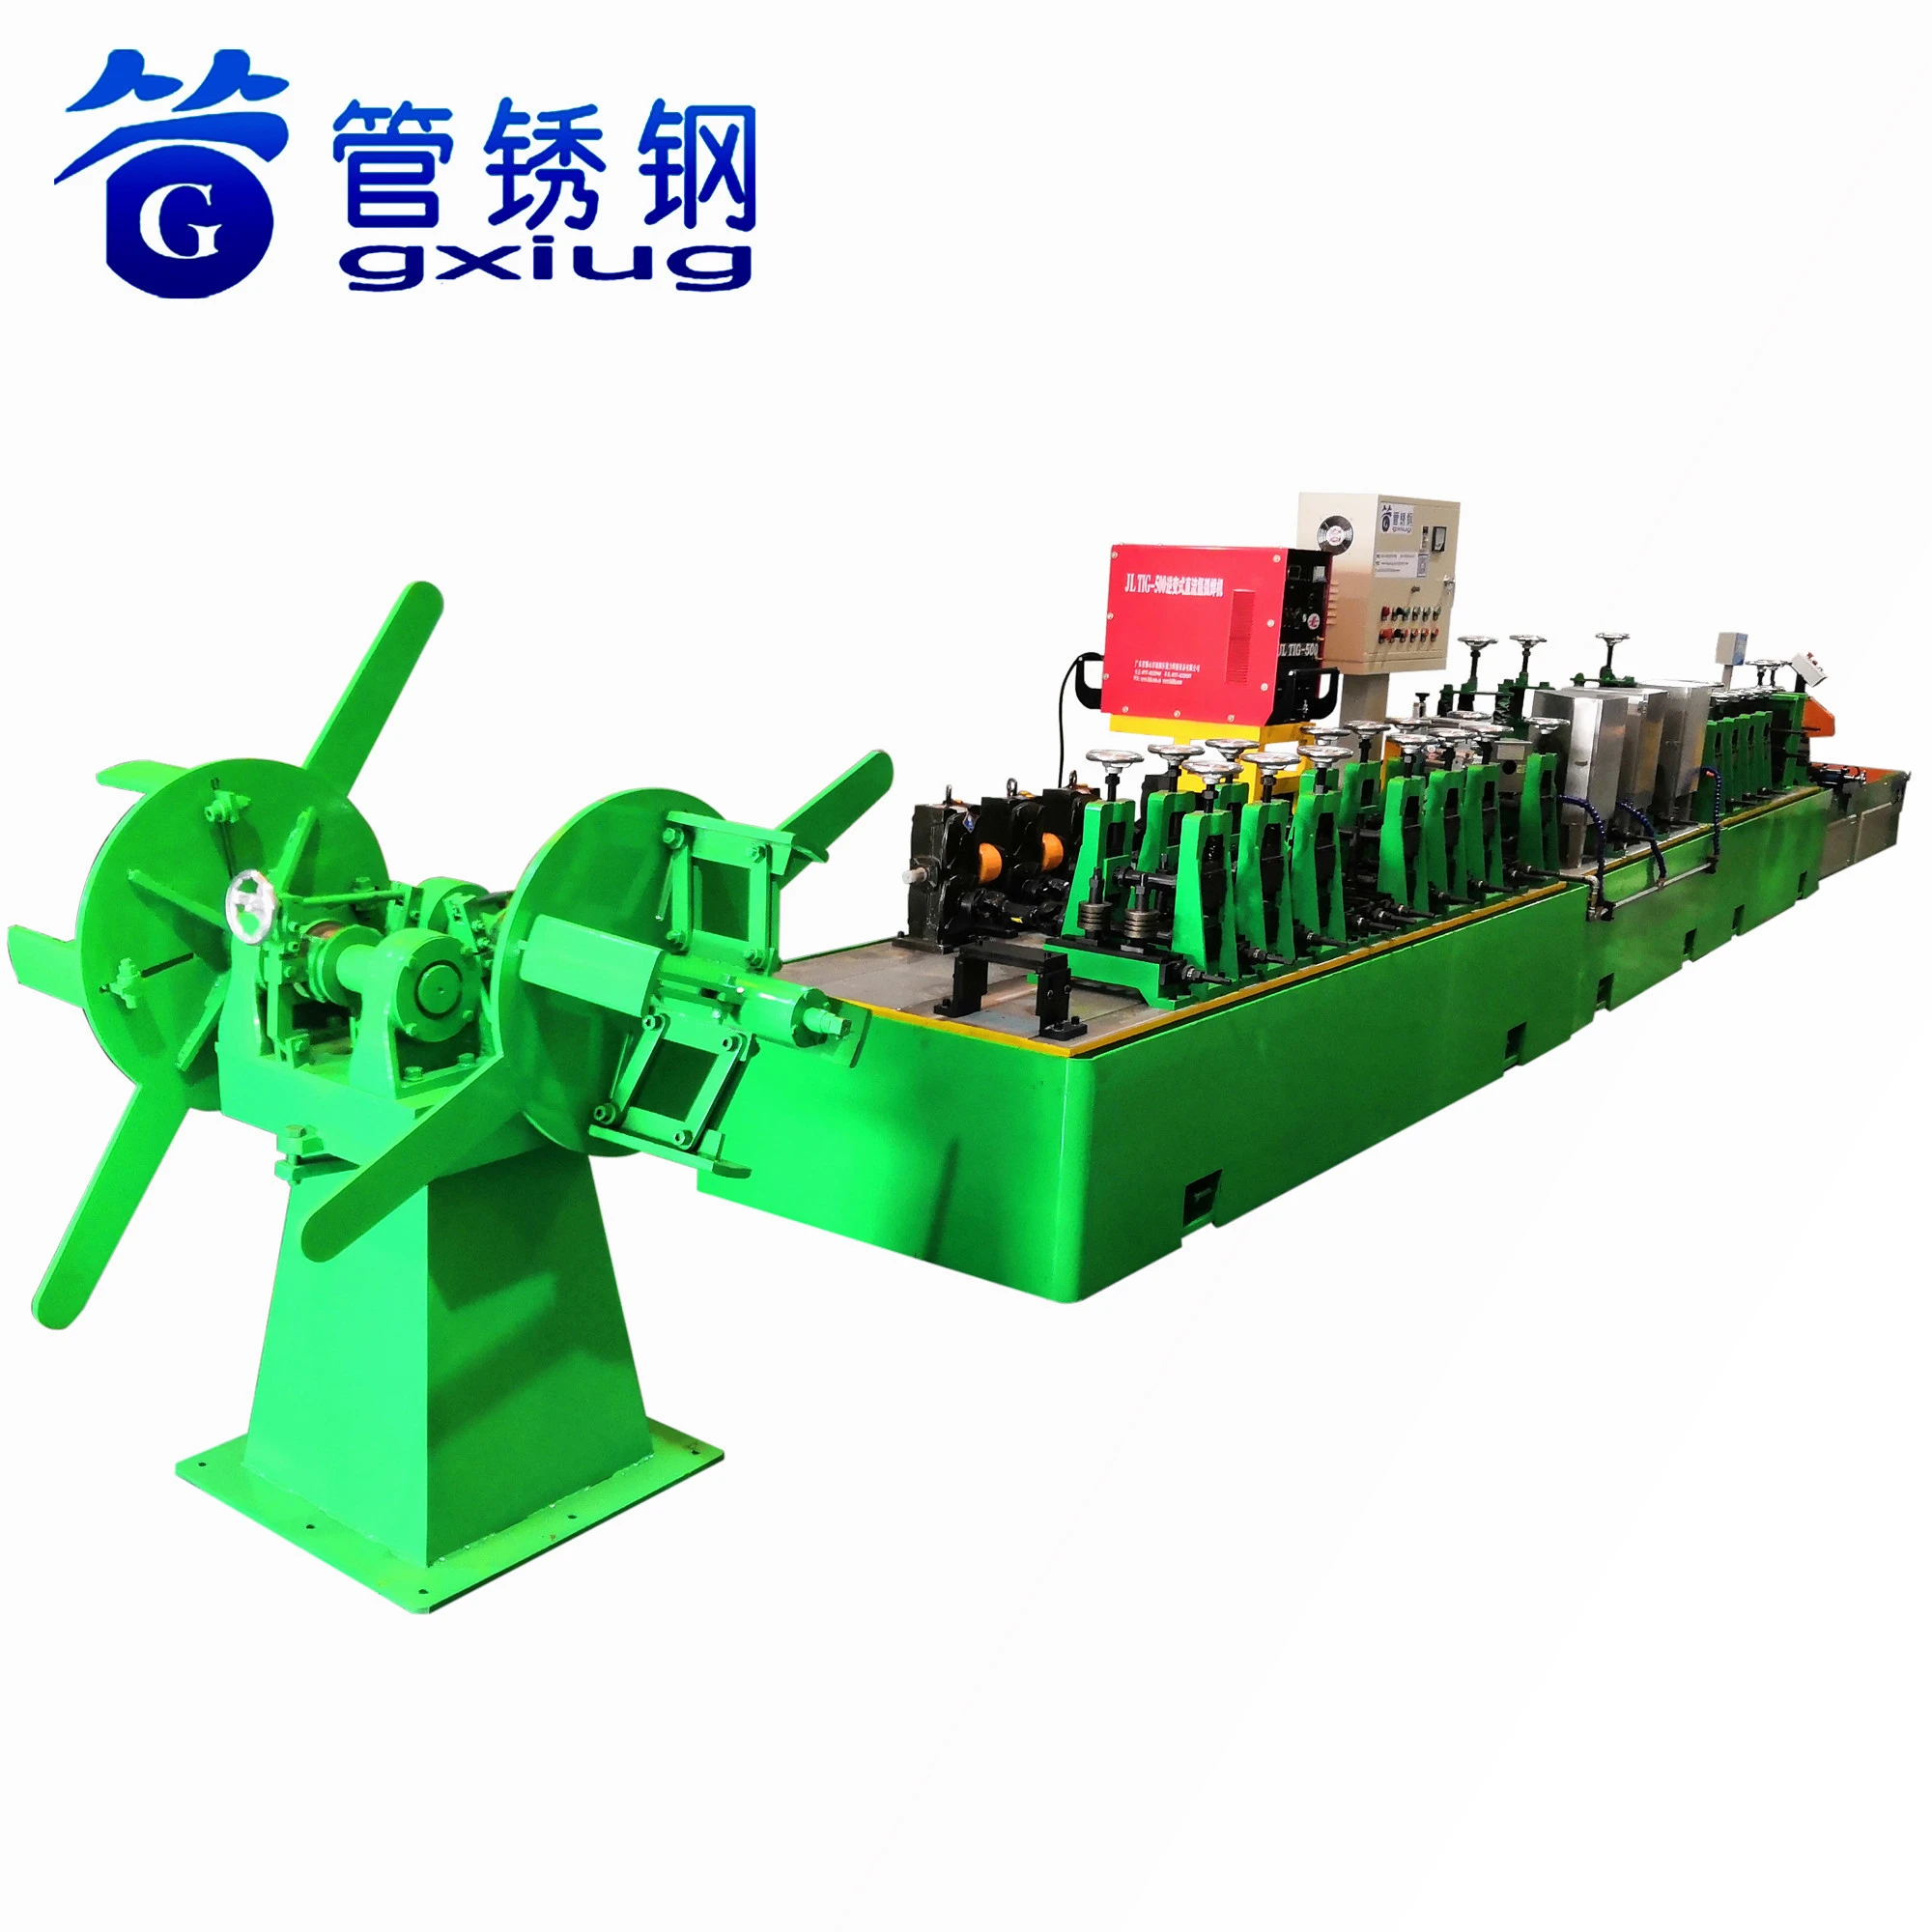 China Good Reputation Decoration Pipe Welded Machinery Equipment Full Automation Production Line